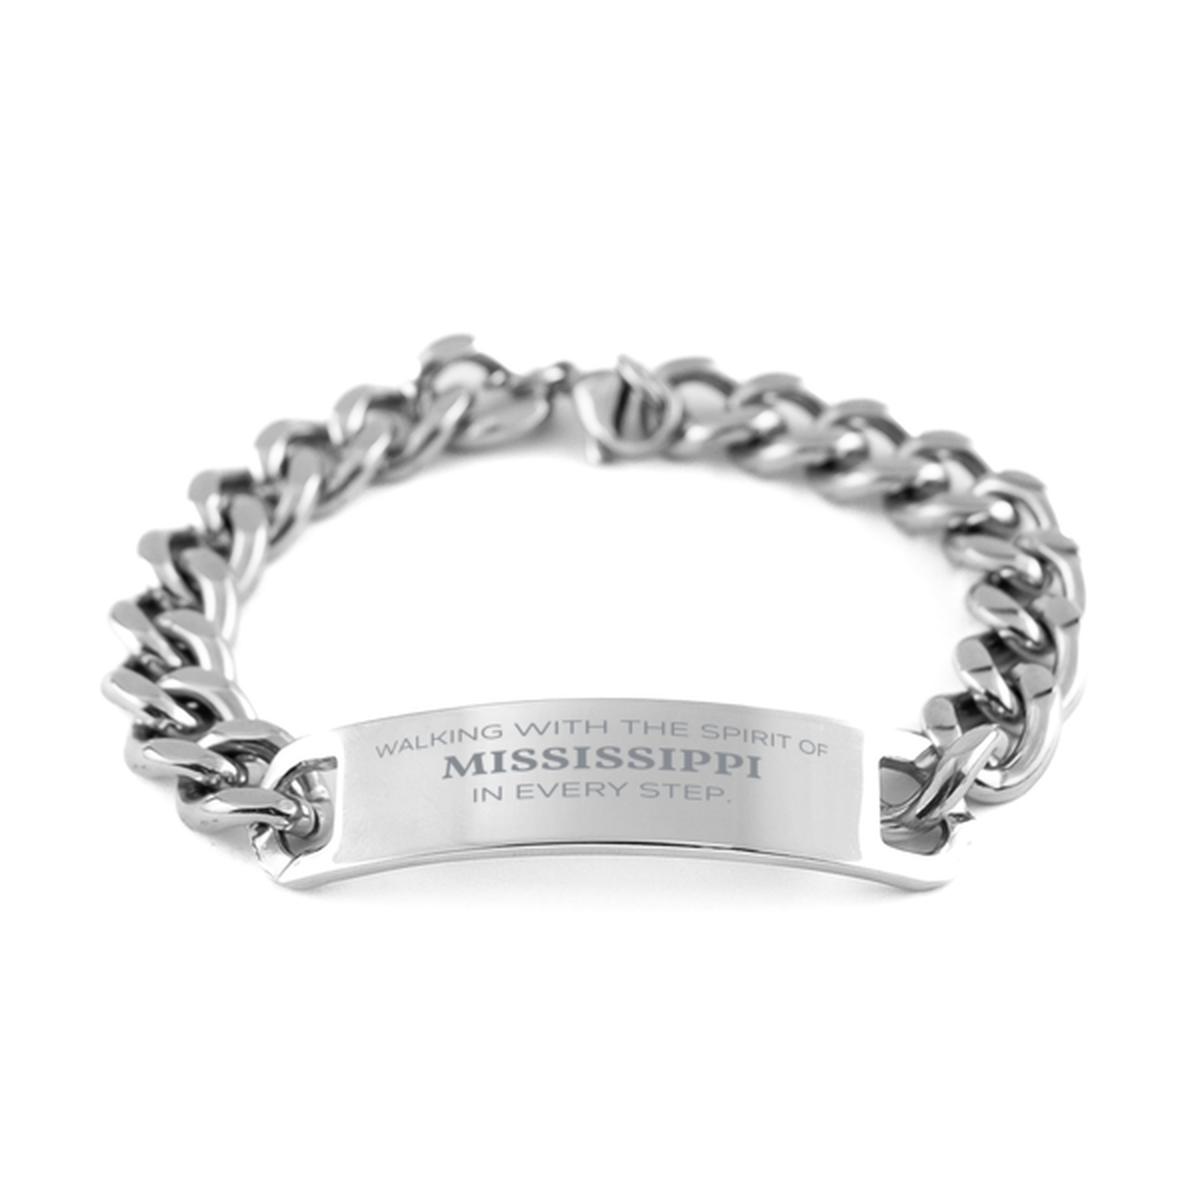 Mississippi Gifts, Walking with the spirit, Love Mississippi Birthday Christmas Cuban Chain Stainless Steel Bracelet For Mississippi People, Men, Women, Friends